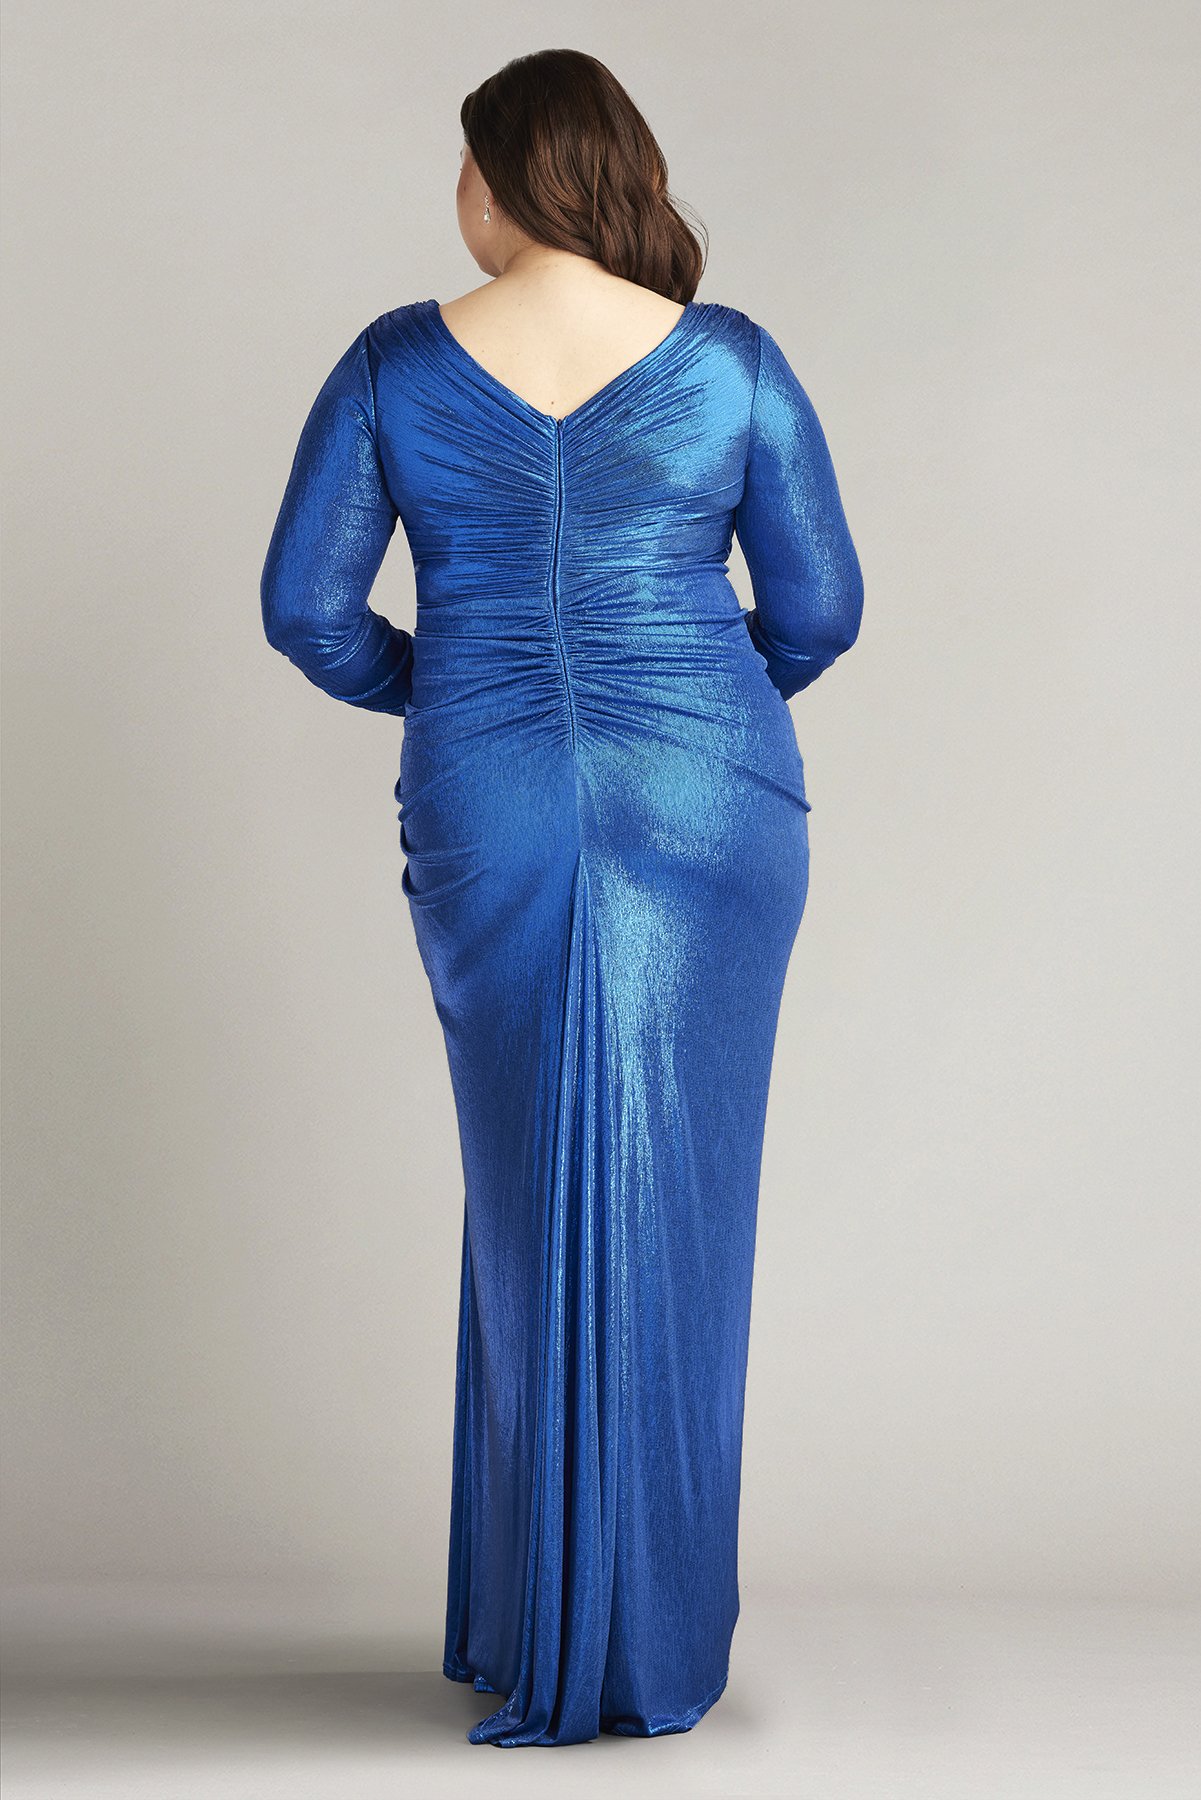 Voll Draped Metallic Jersey Gown - PLUS SIZE